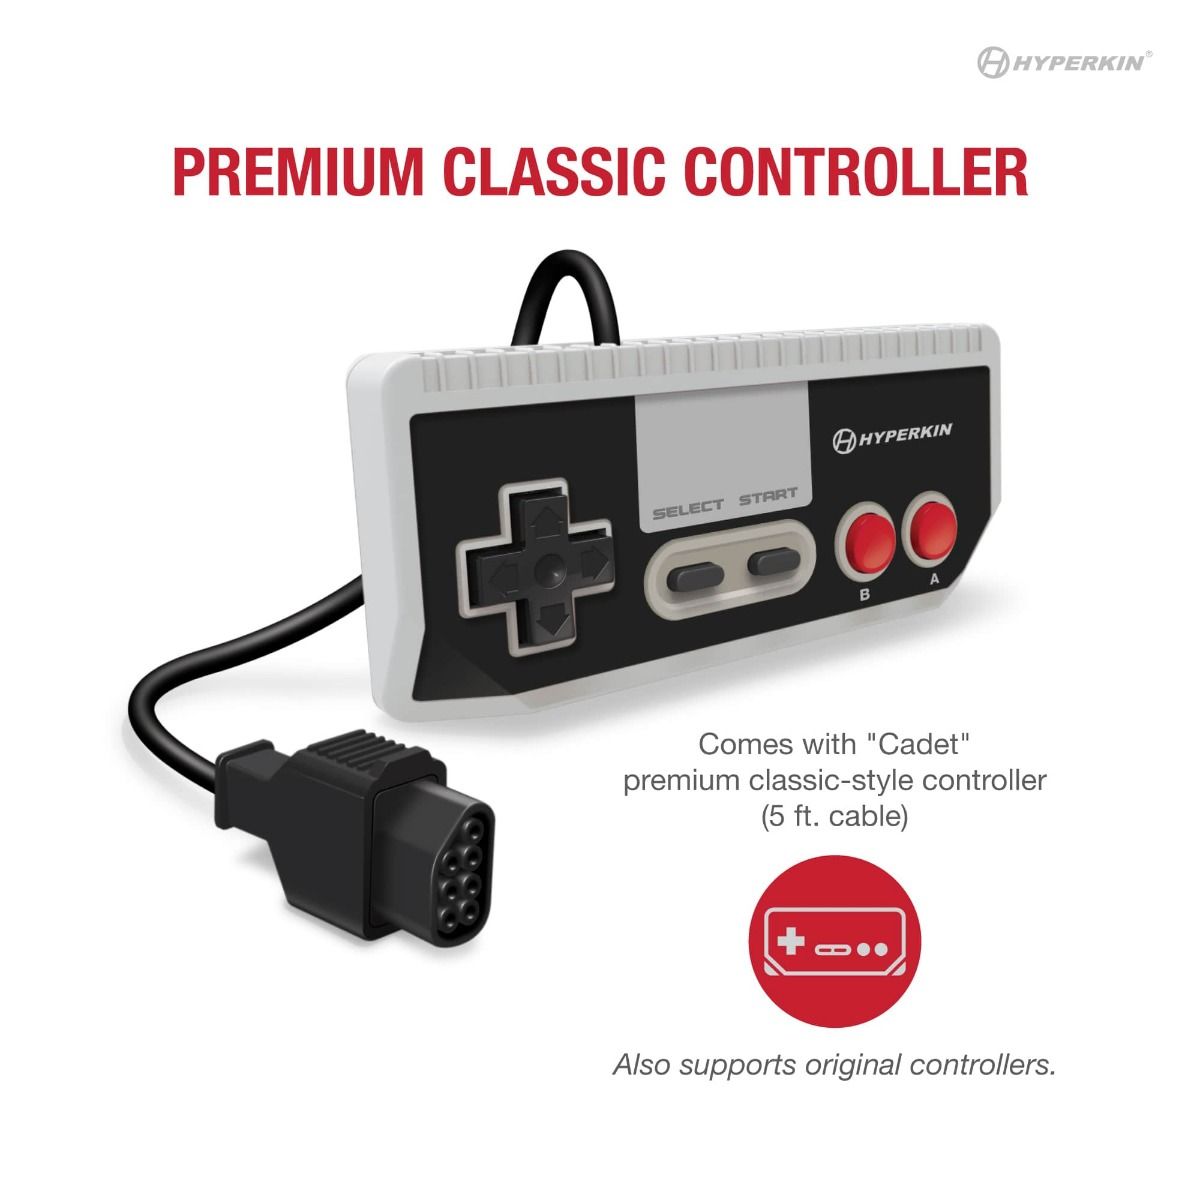 RetroN 1 AV Gaming Console Compatible With NES® (Gray)